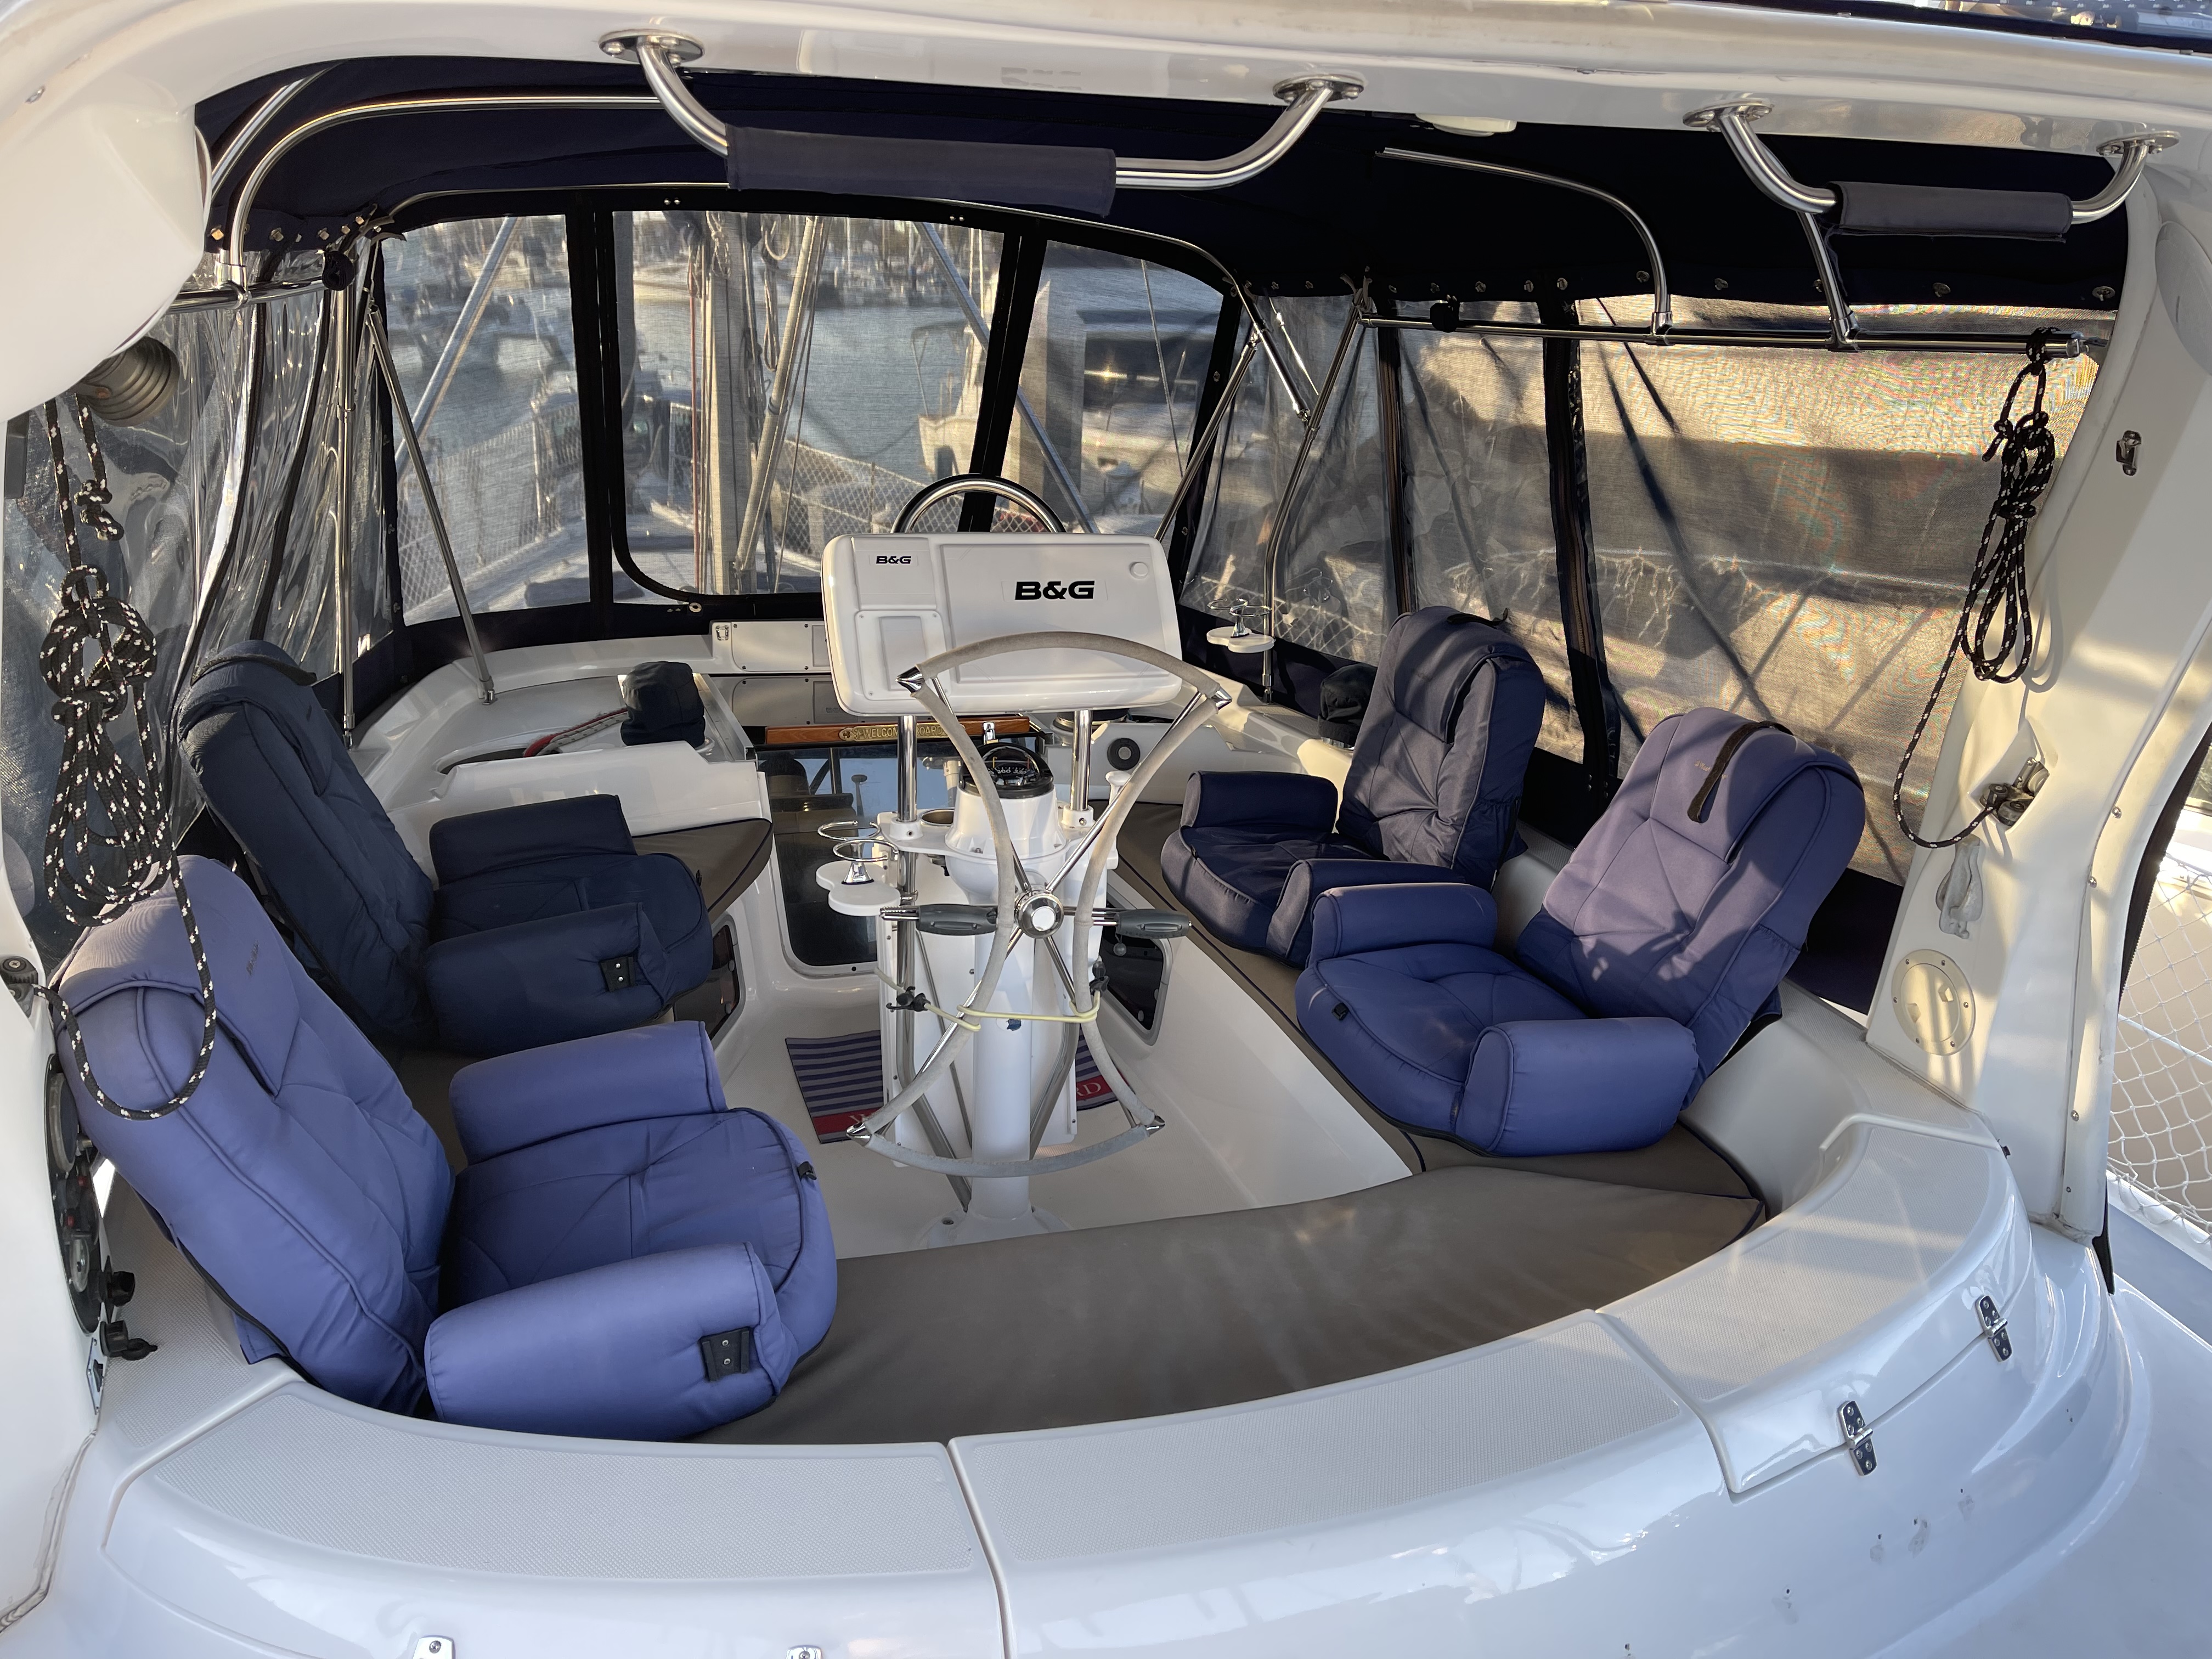 1998 Hunter Passage 450 Sailboat for sale in Long Beach, CA - image 9 